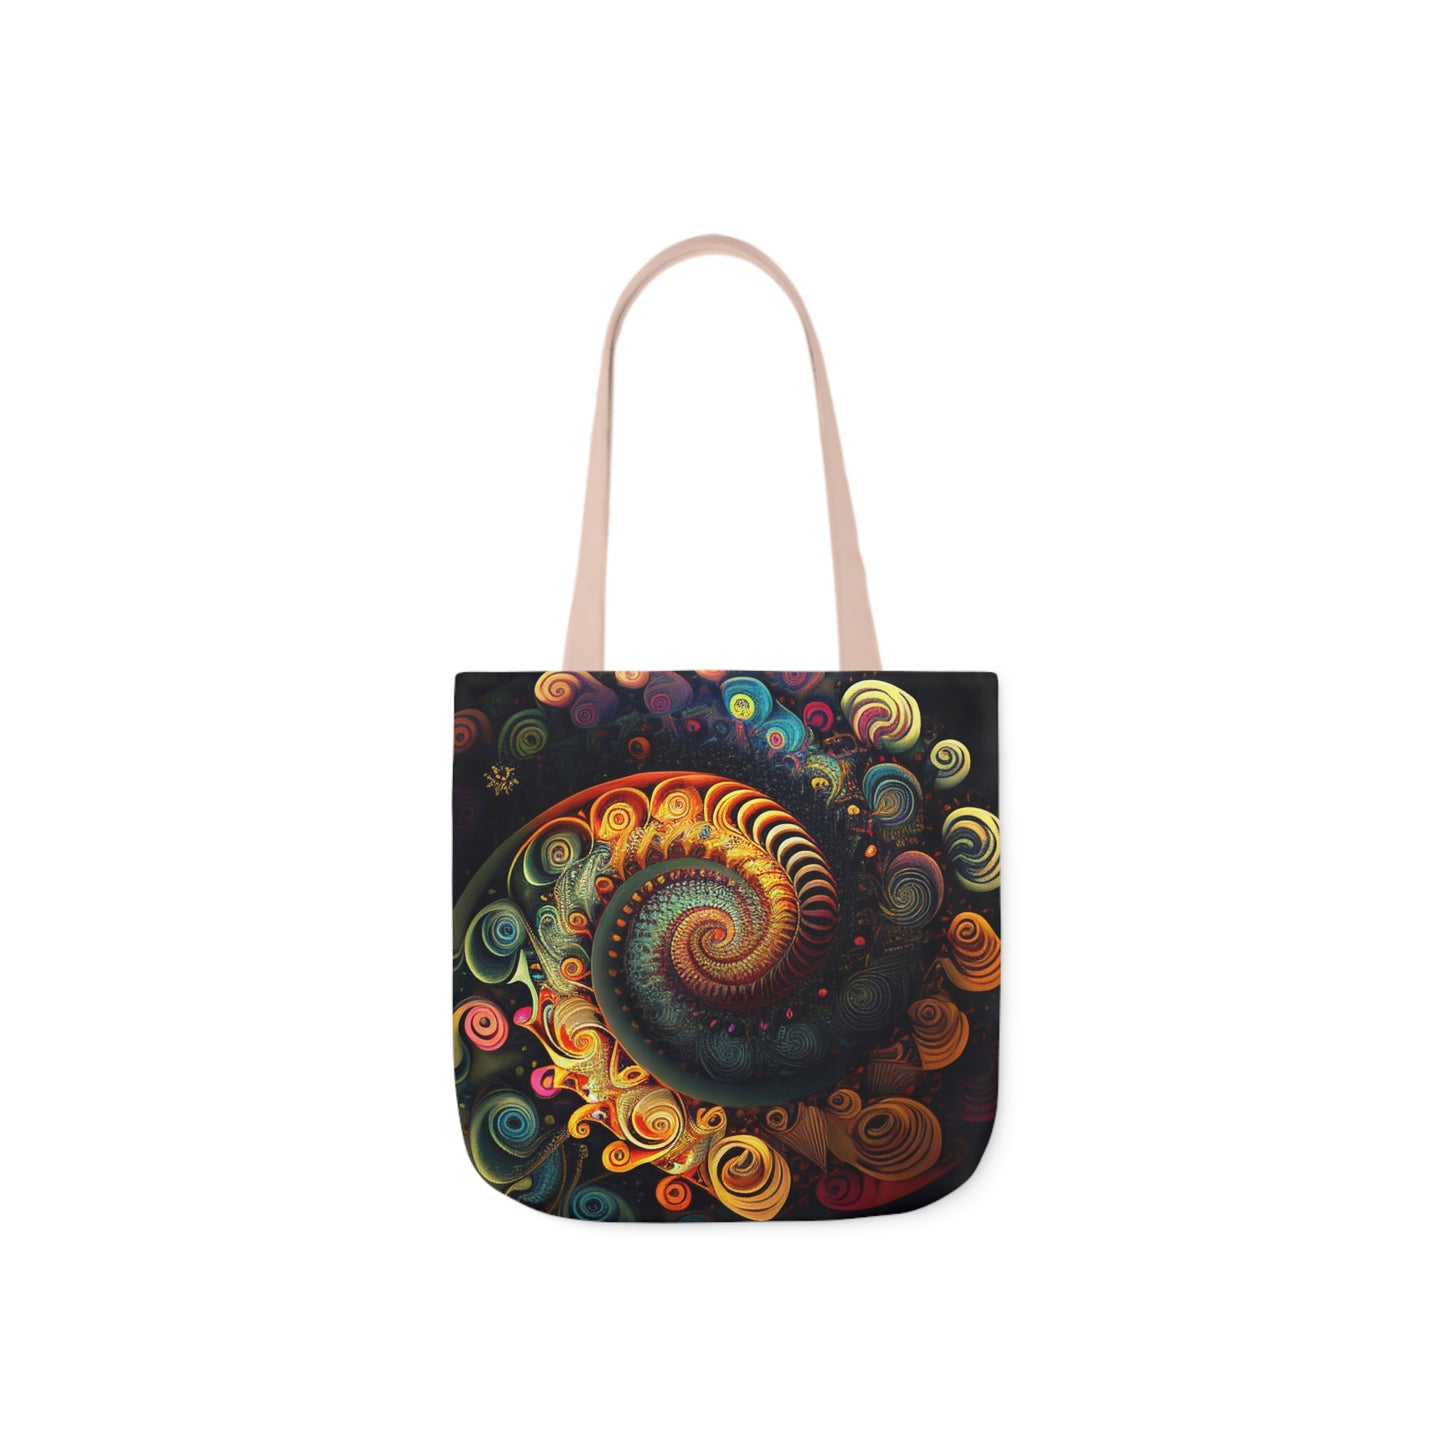 Psychedelic Swirls Tote Bag